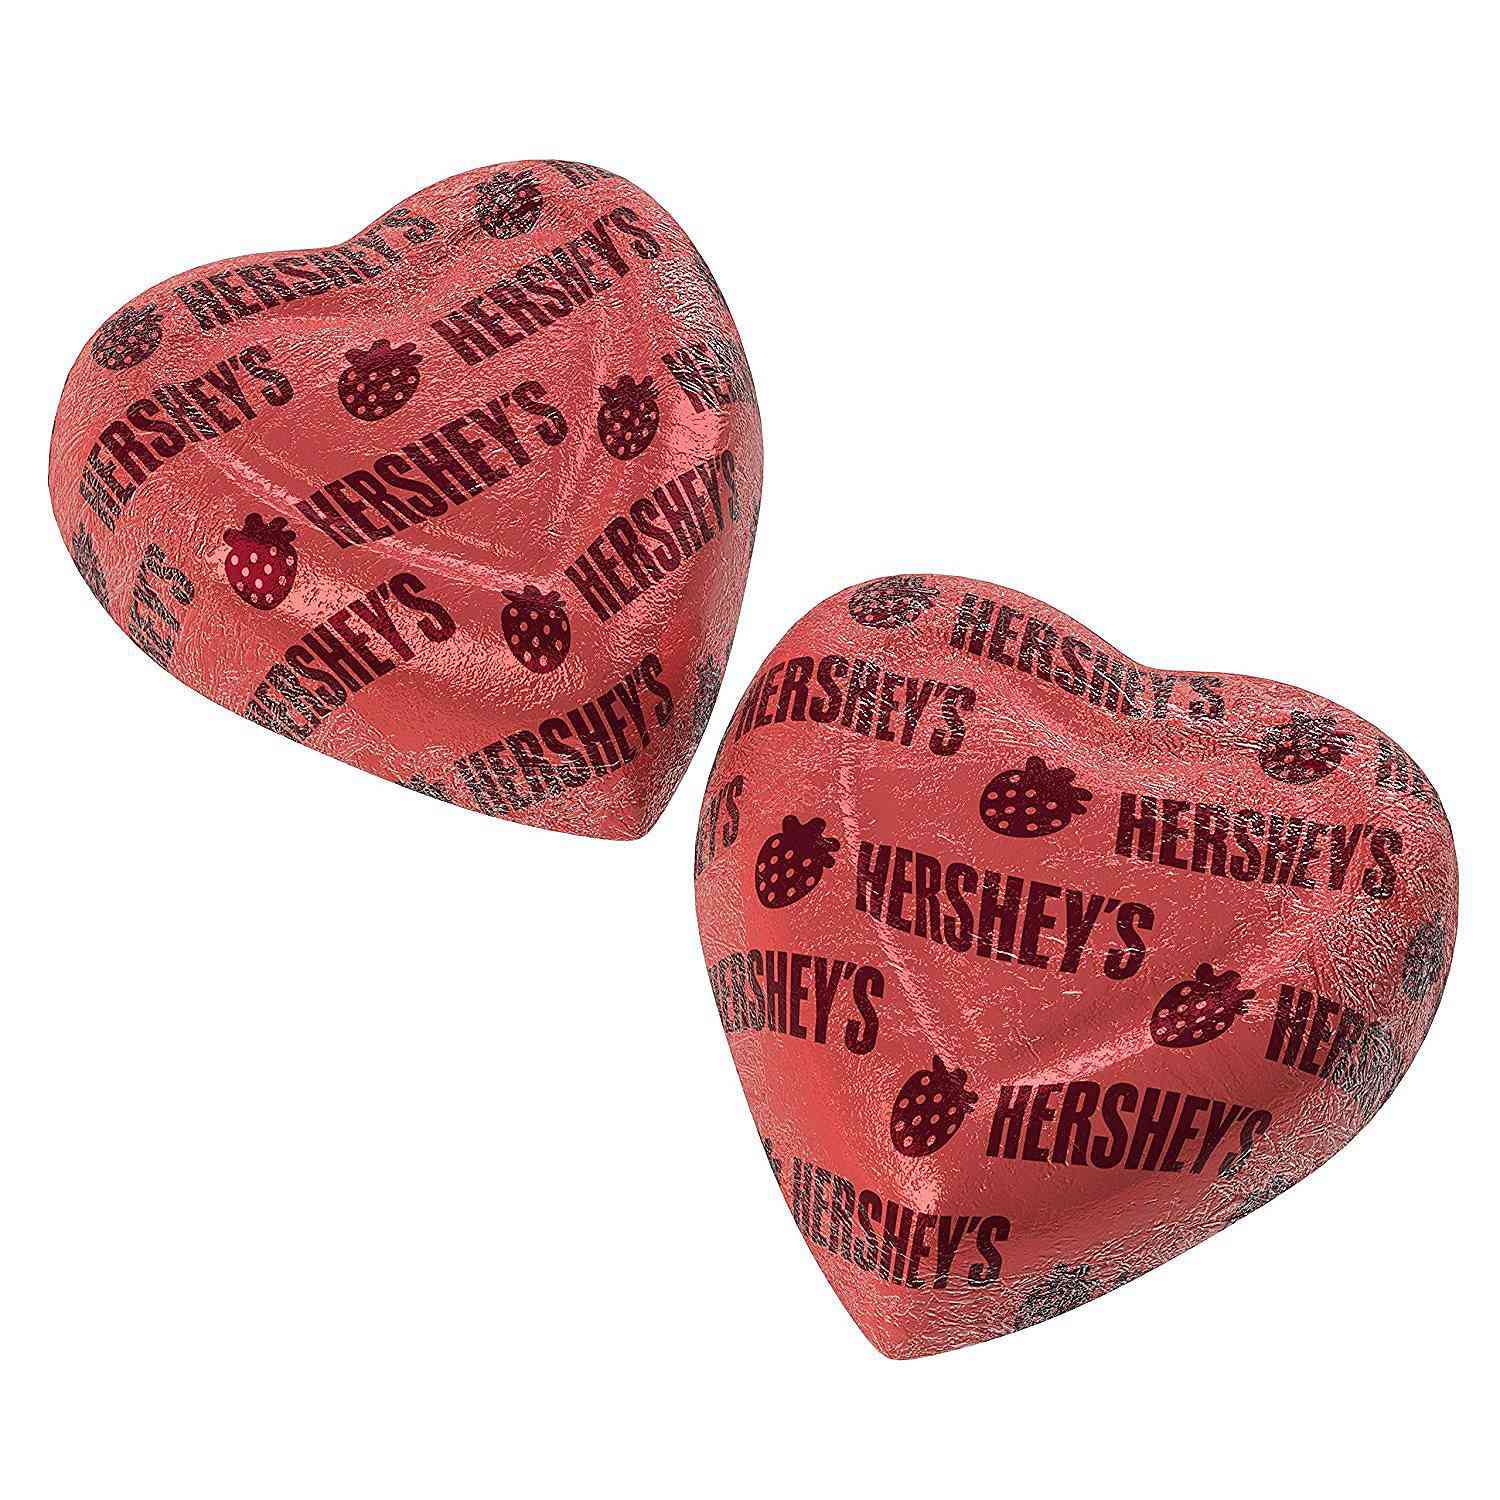 Edible Valentine's Day Gifts